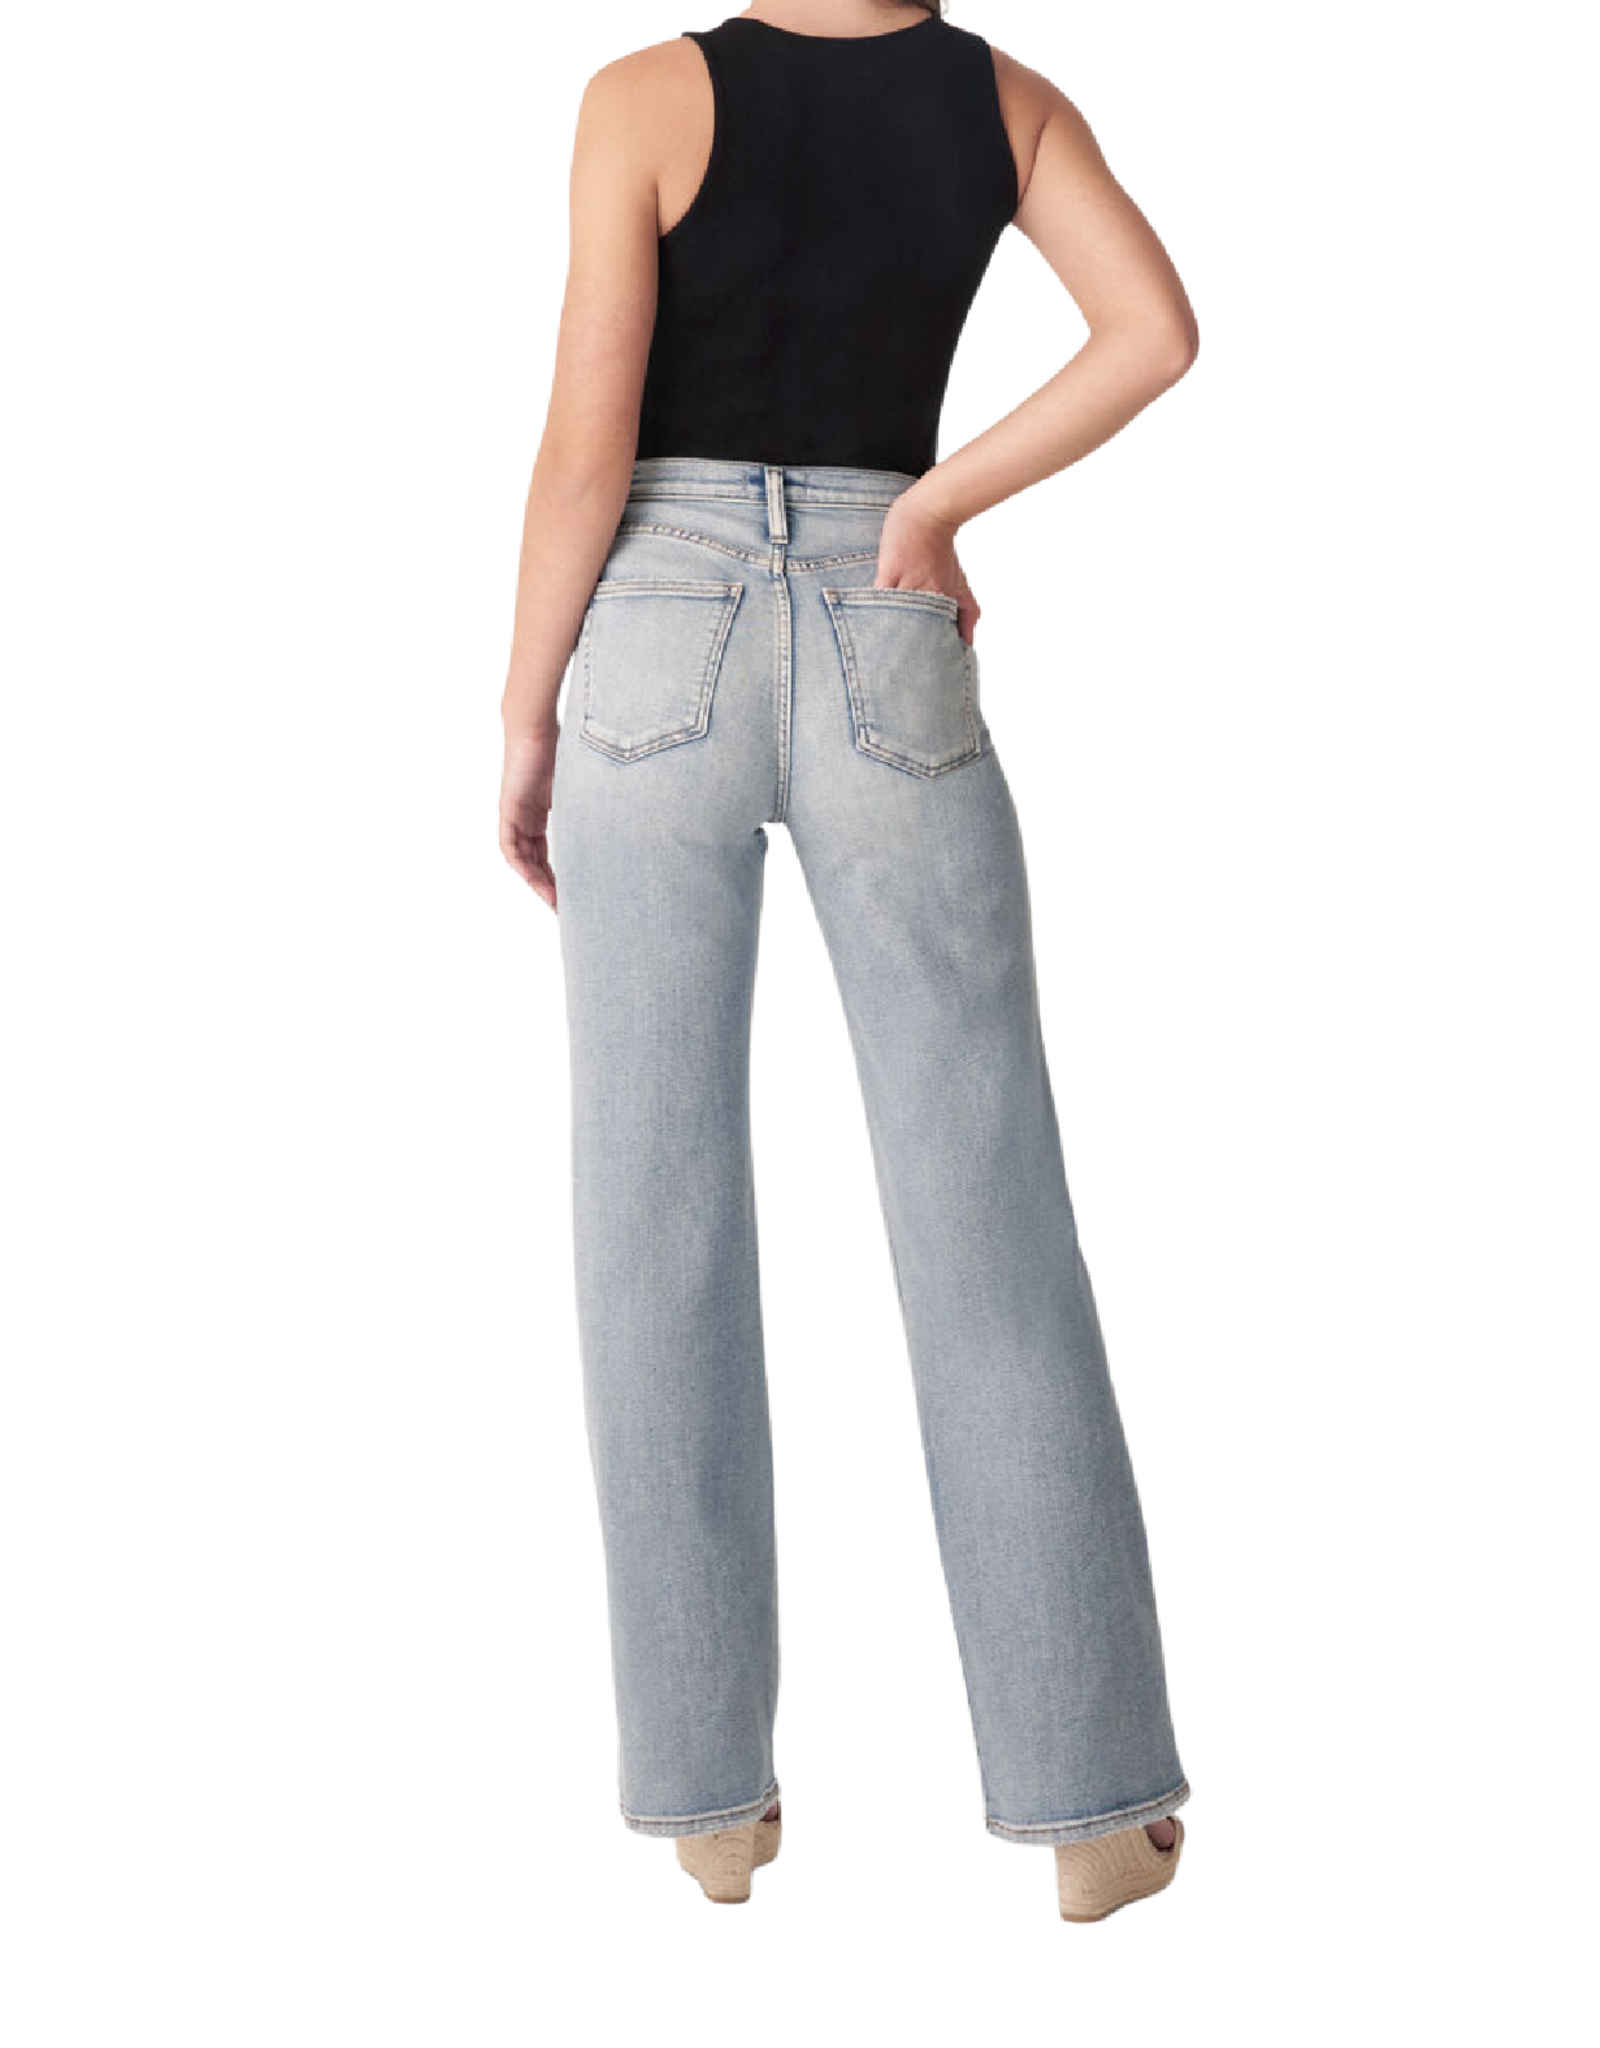 Silver Jeans - Highly Desirable Trouser 31" inseam